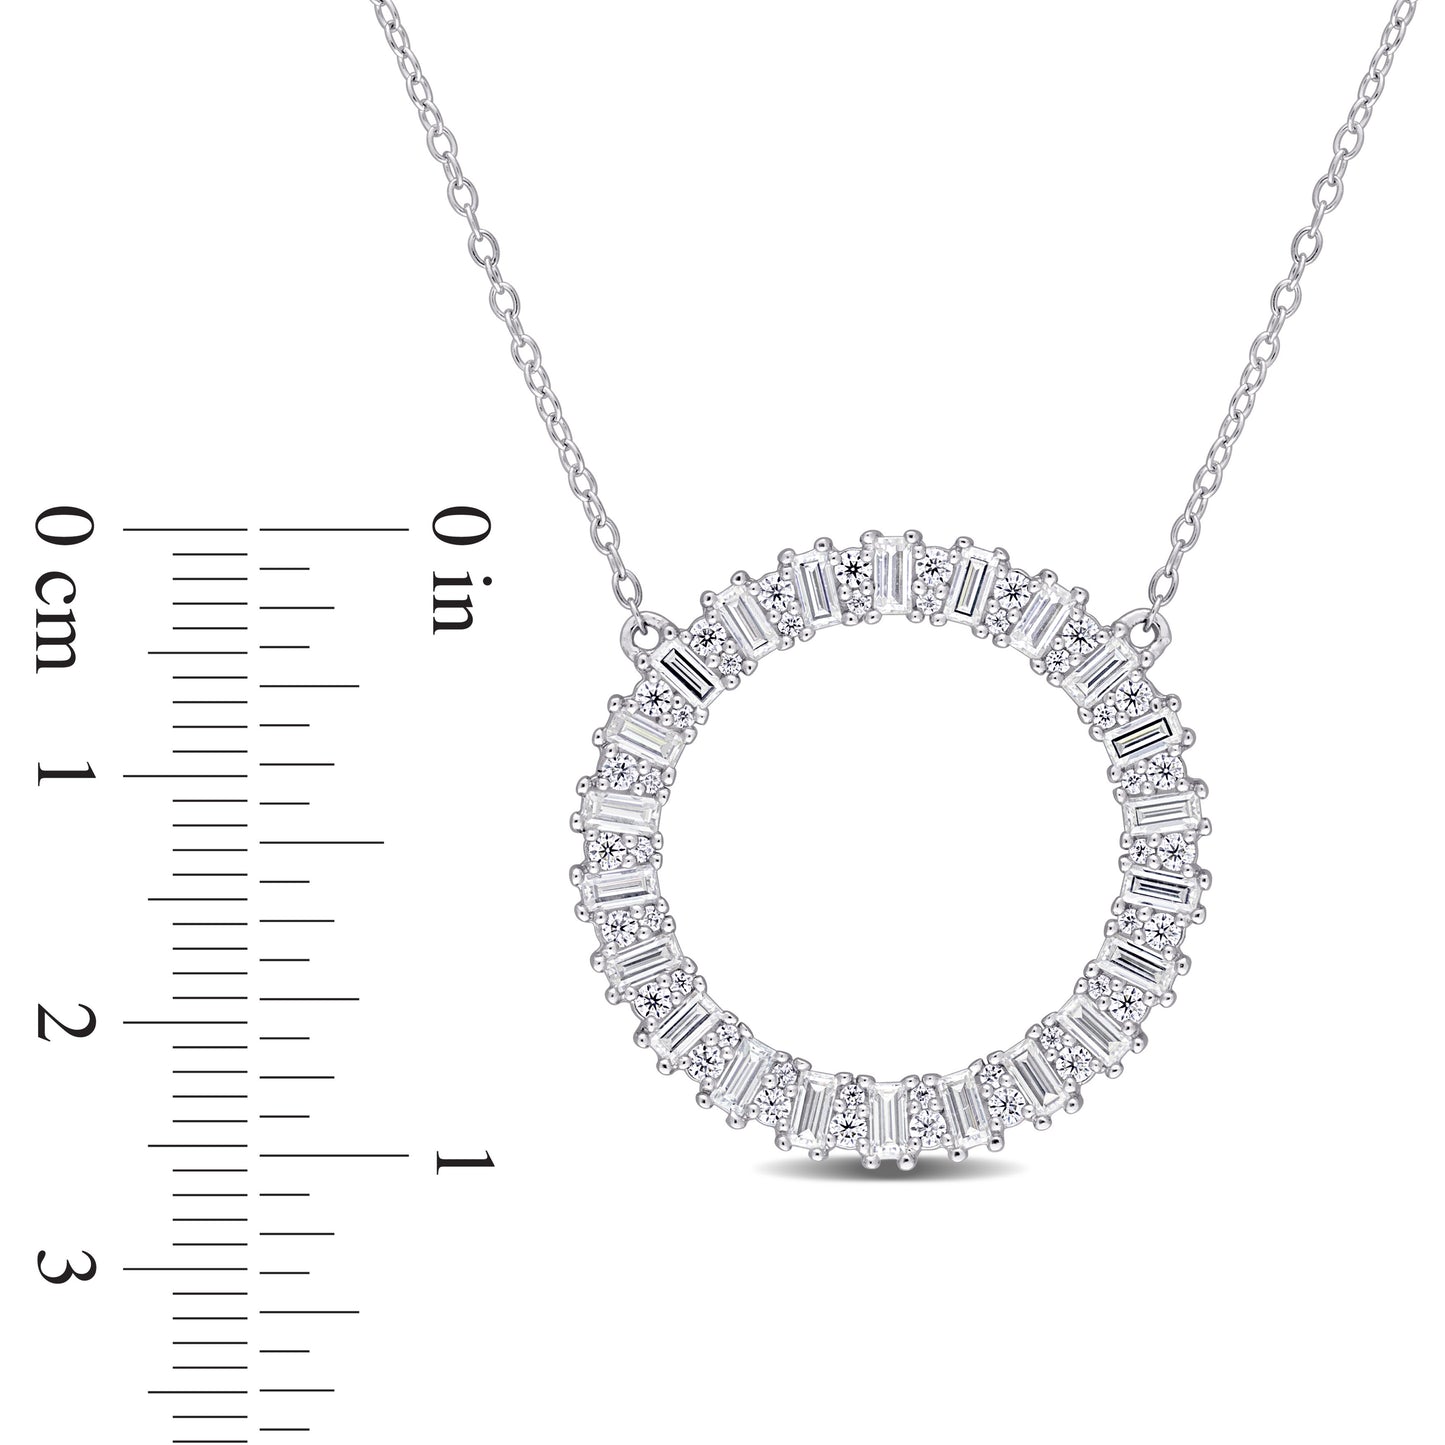 3/5ct Moissanite Open Circle Necklace in Sterling Silver